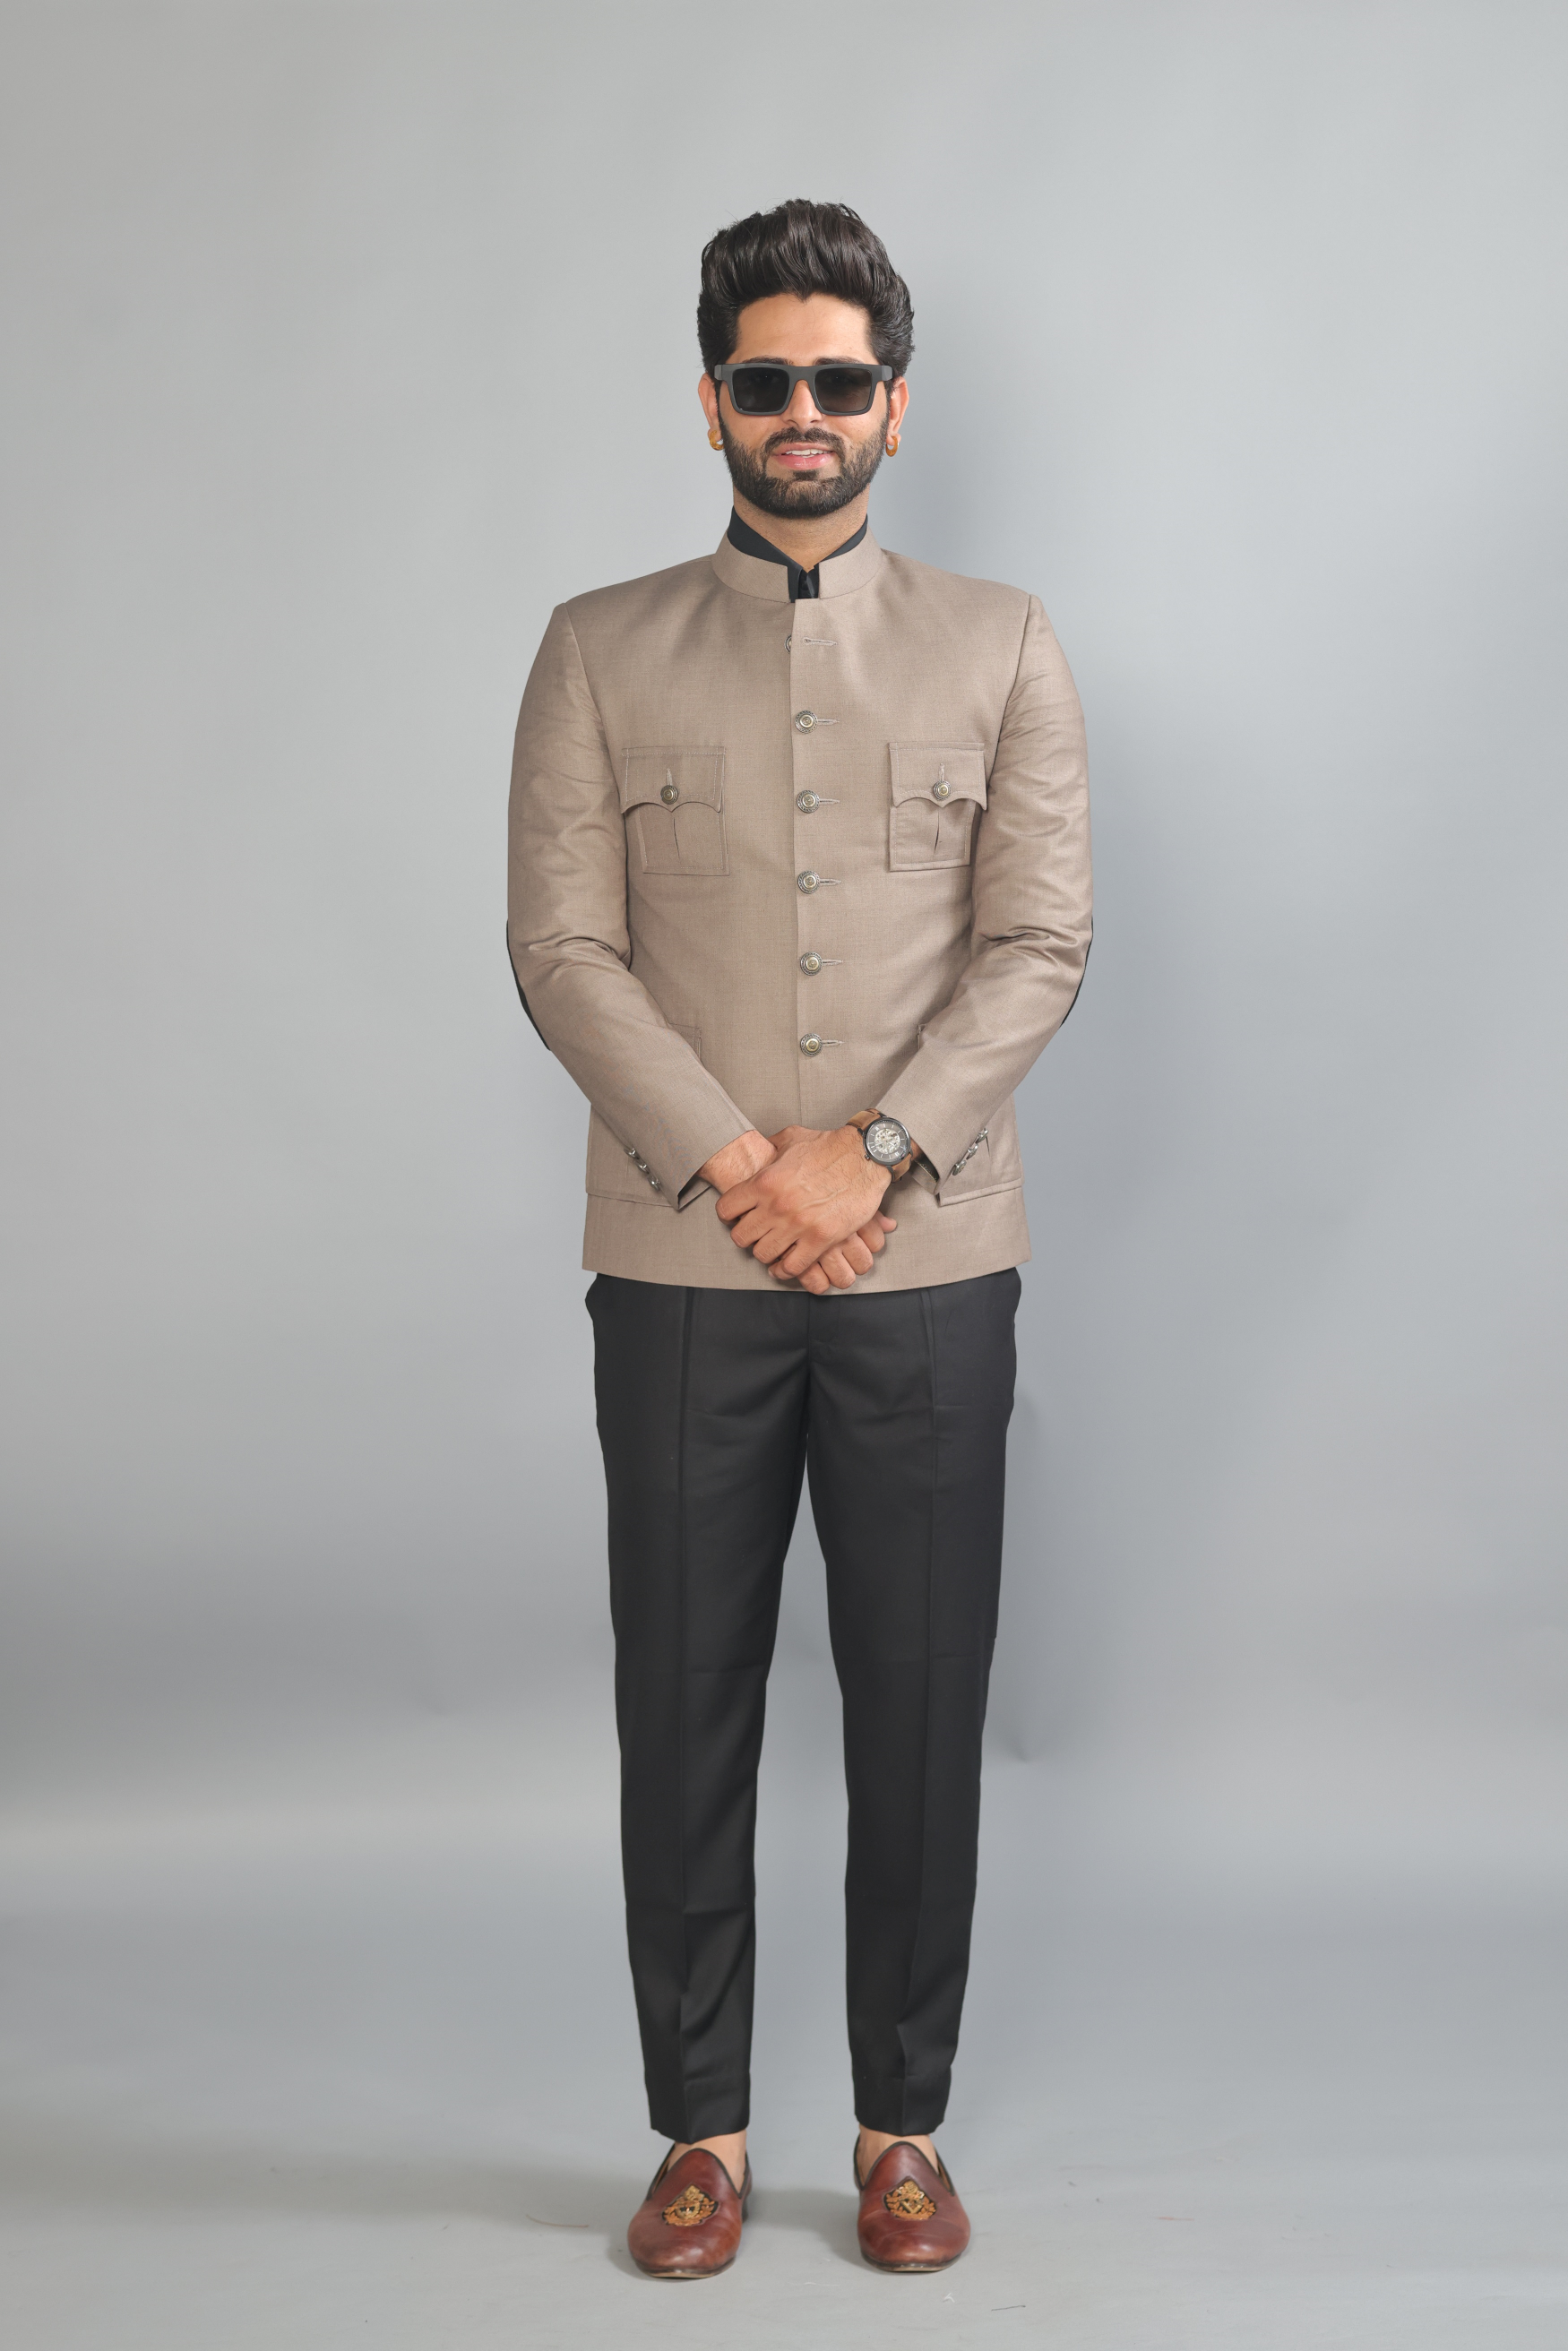 Exclusive Mink Brown  4 pocket Hunting Style Jodhpuri Bandh gala with Black Trouser | Elegant Elite Styling | Perfect for Family Weddings Formal Parties Ring Ceremony